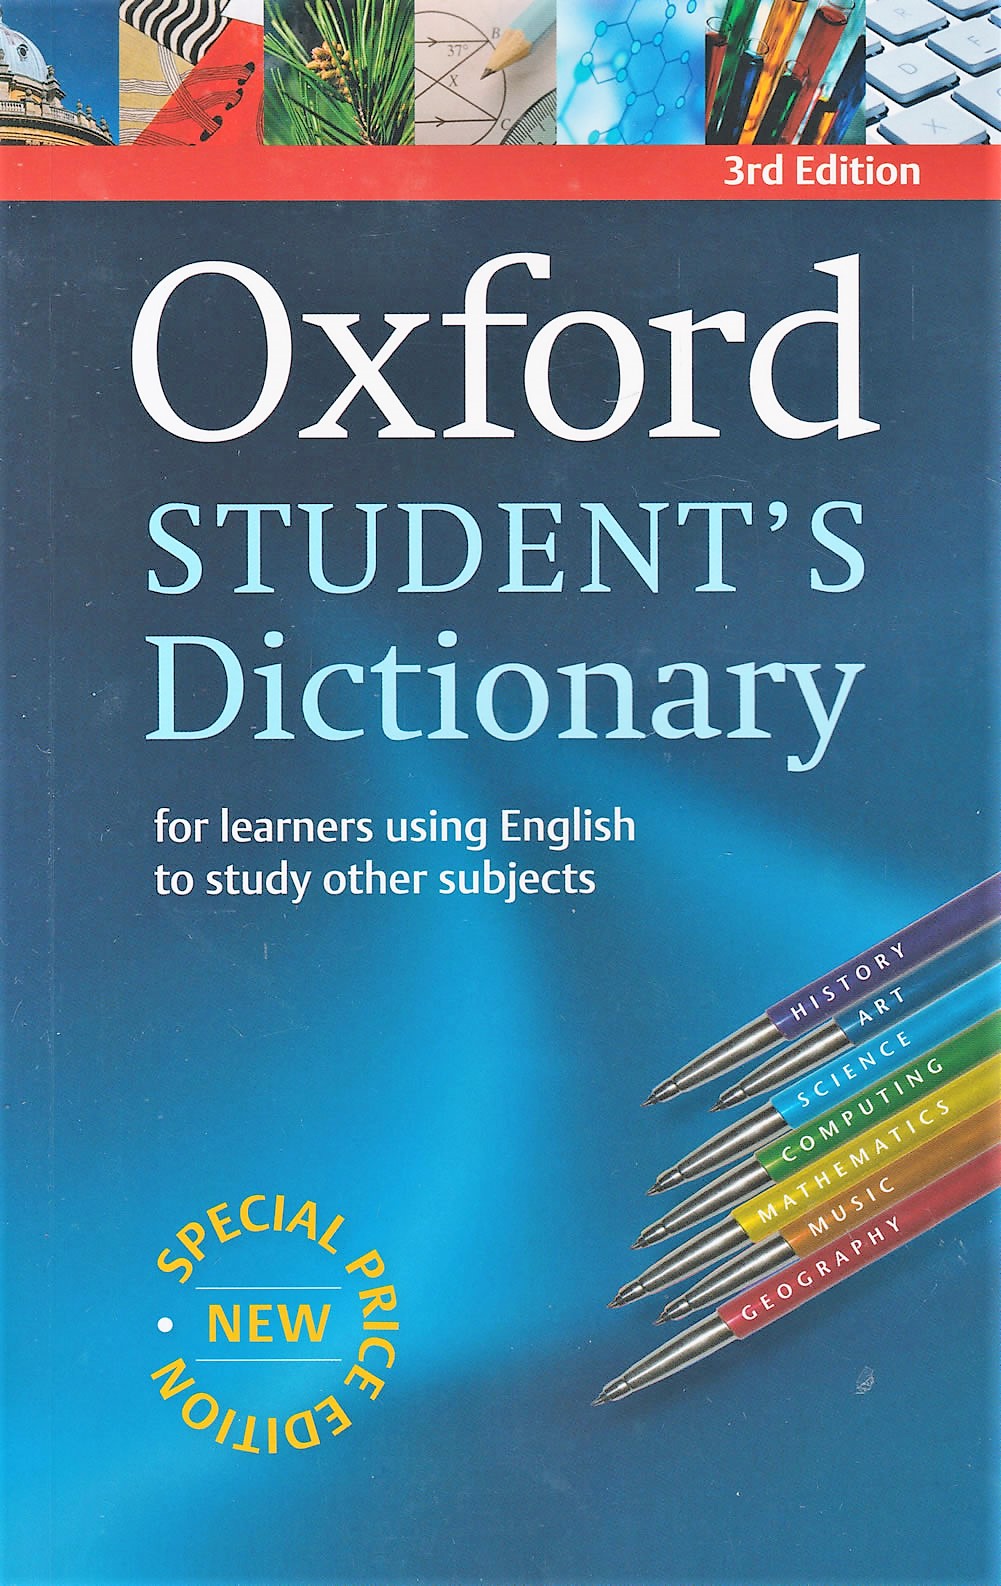 Oxford Students Dictionary 3rd Edition